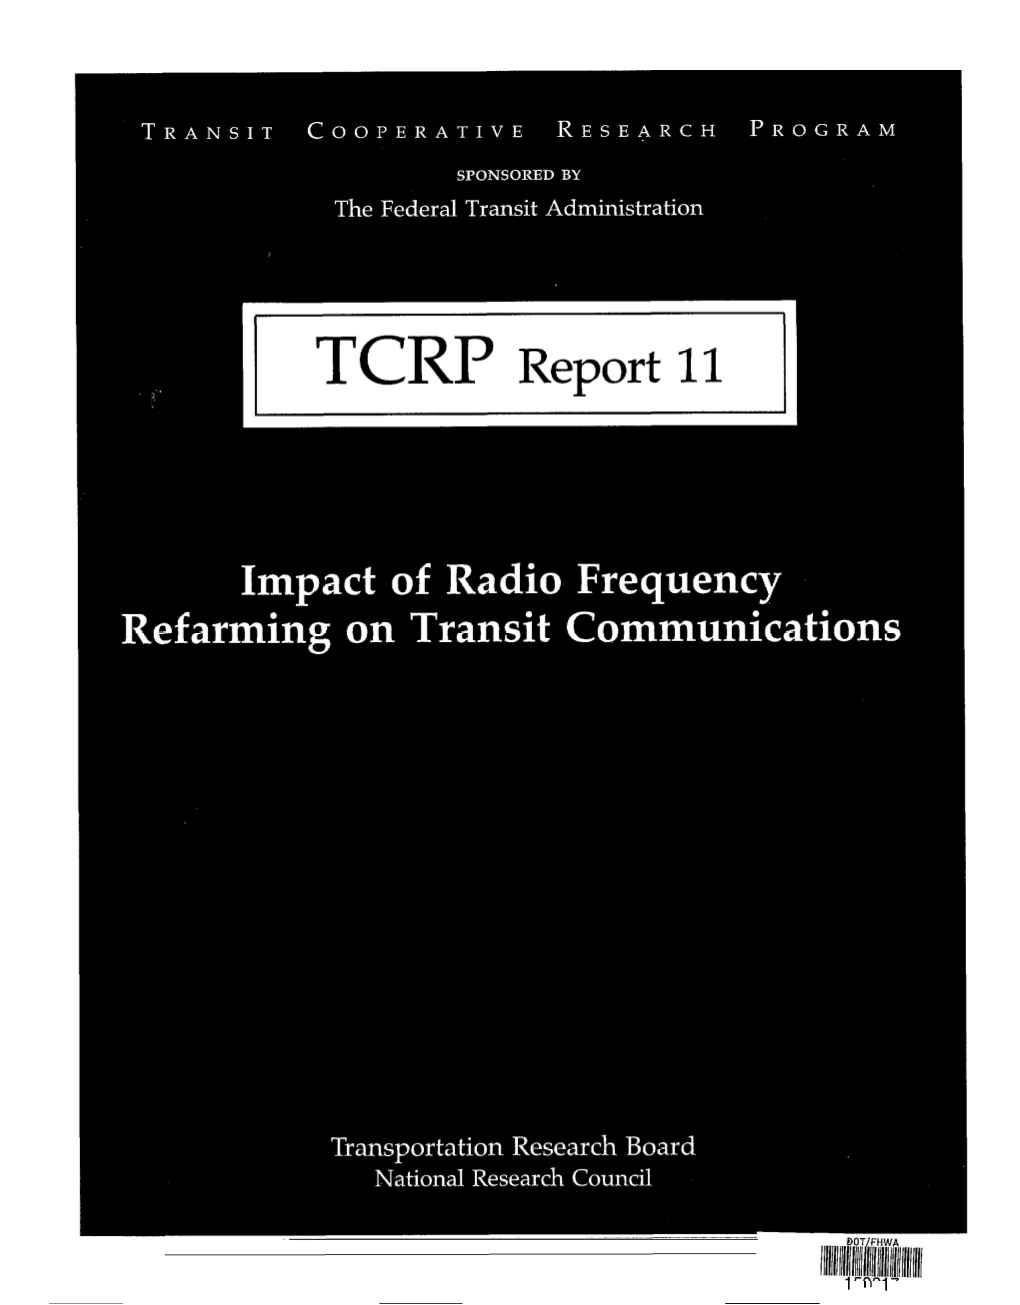 TCRP Report 11, Impact of Radio Frequency Refarming on Transit